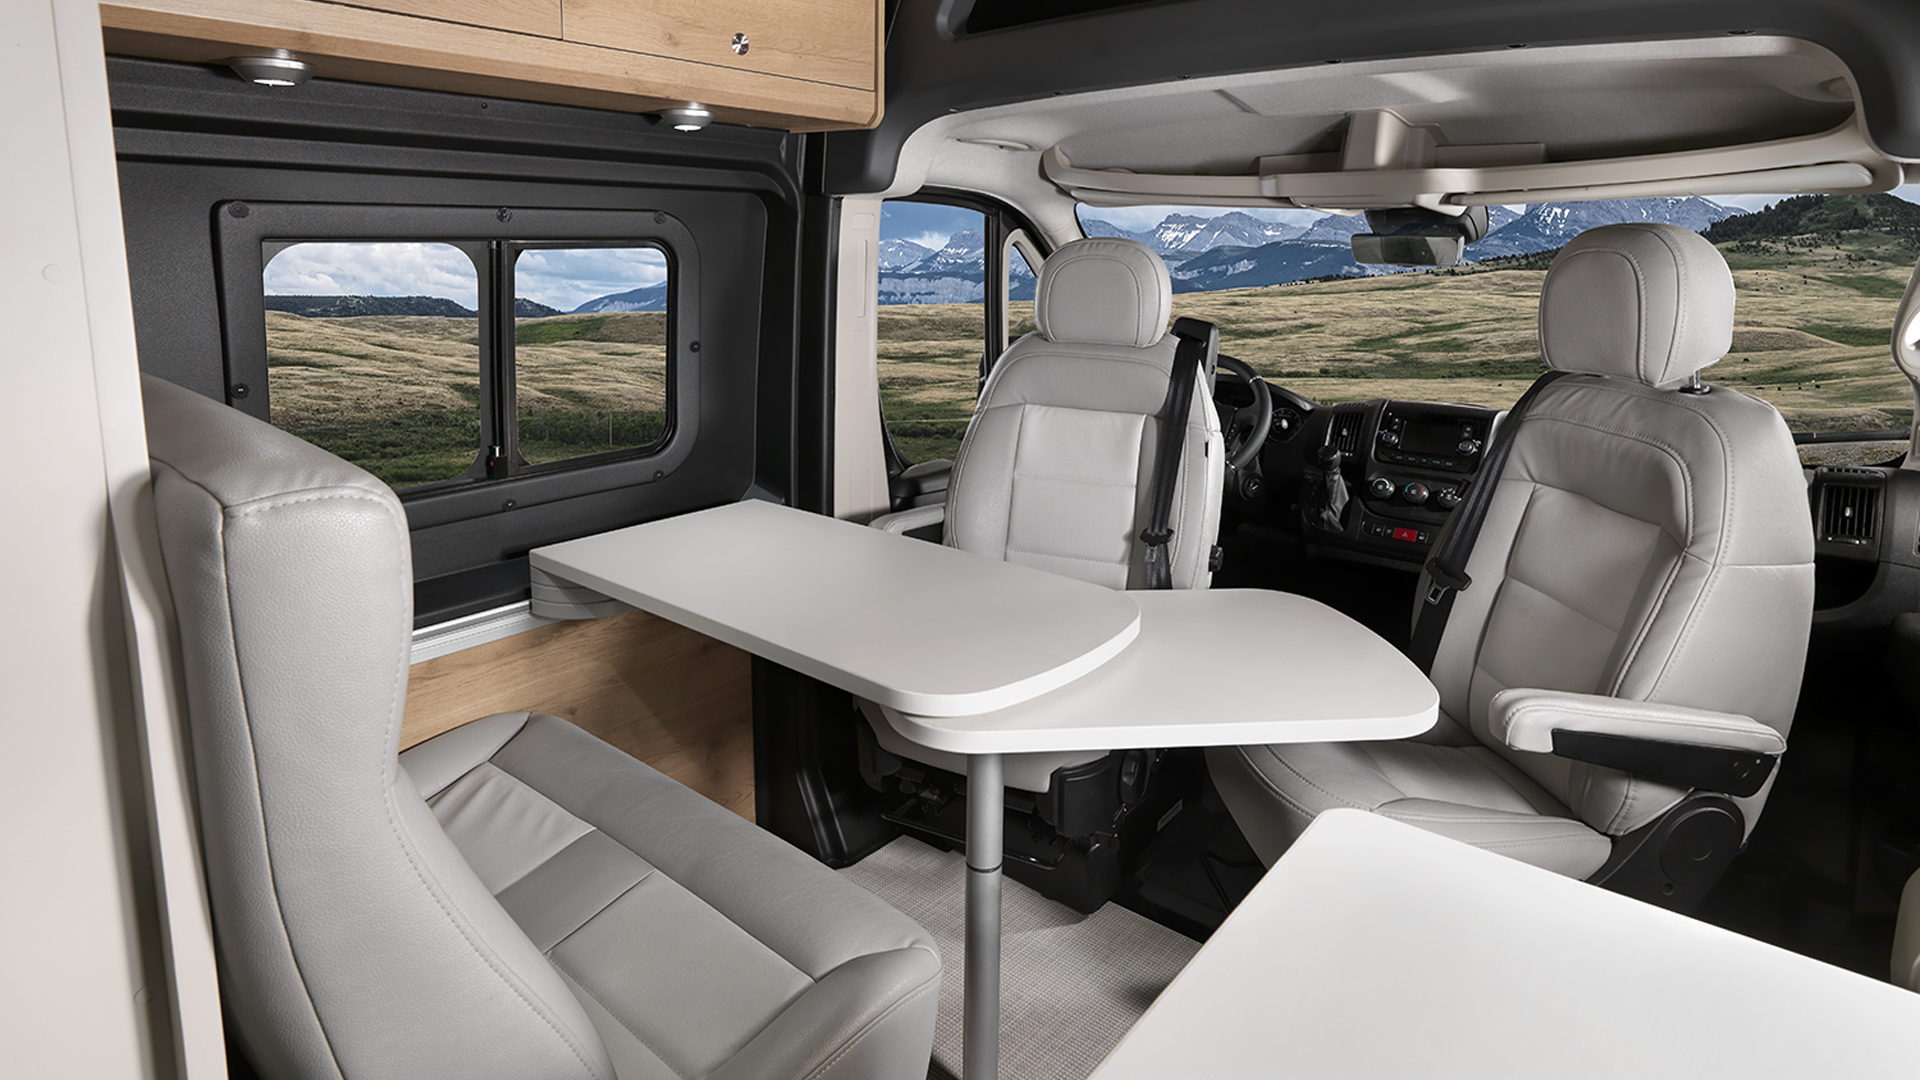 Introducing the All-New Airstream Rangeline Touring Coach - Airstream